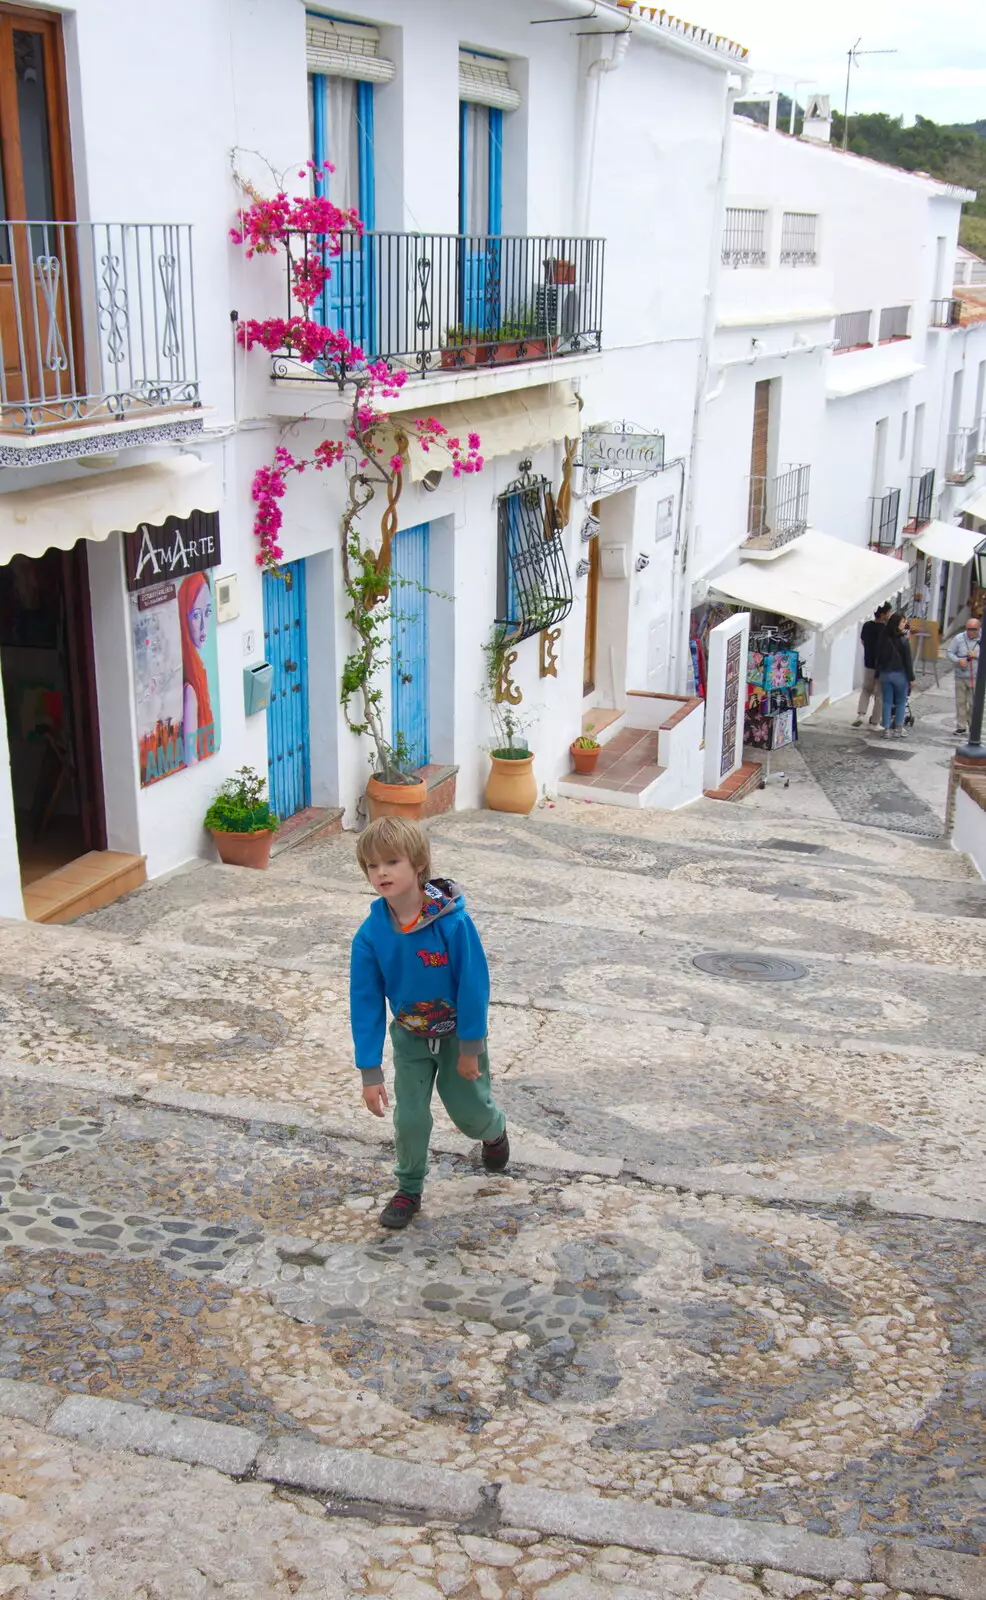 Harry grows weary of climbing up steps, from The Caves of Nerja, and Frigiliana, Andalusia, Spain - 18th April 2019